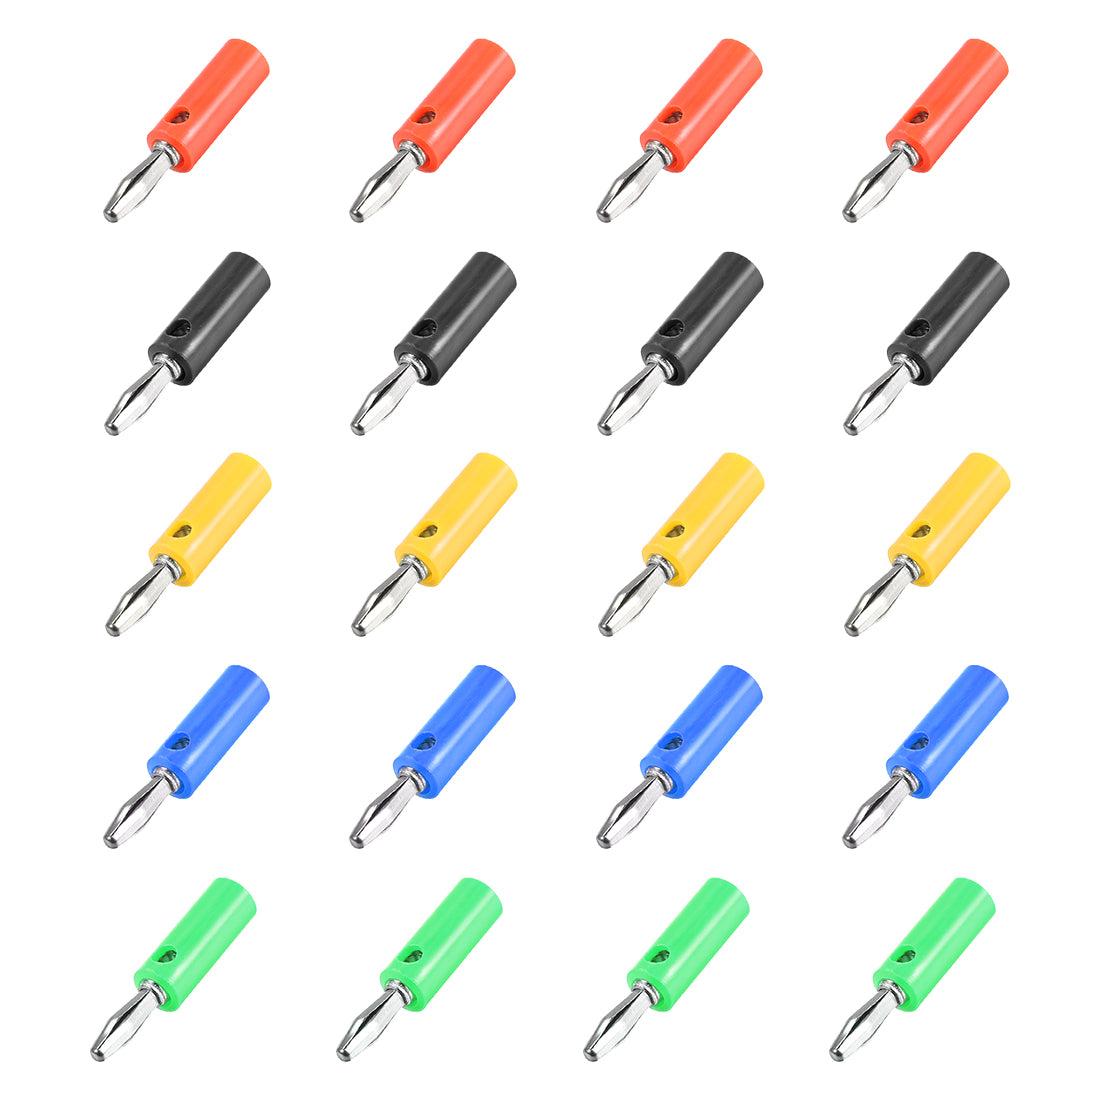 uxcell Uxcell 4mm Banana Speaker Wire Cable Screw Plugs Connectors  5-Colors 20pcs Jack Connector